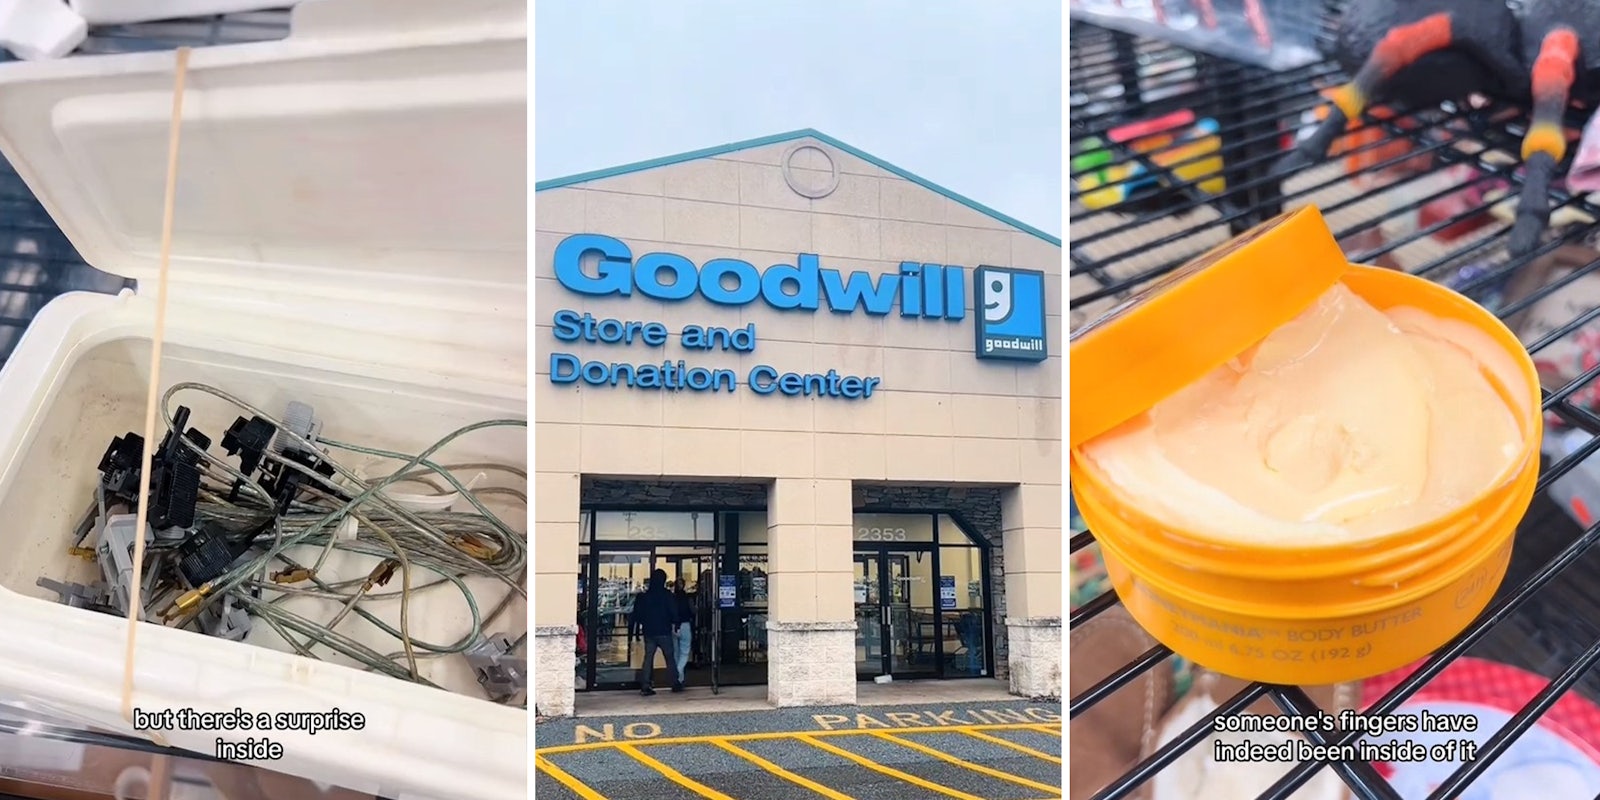 Customer calls out Goodwill for selling random used items at an upcharge